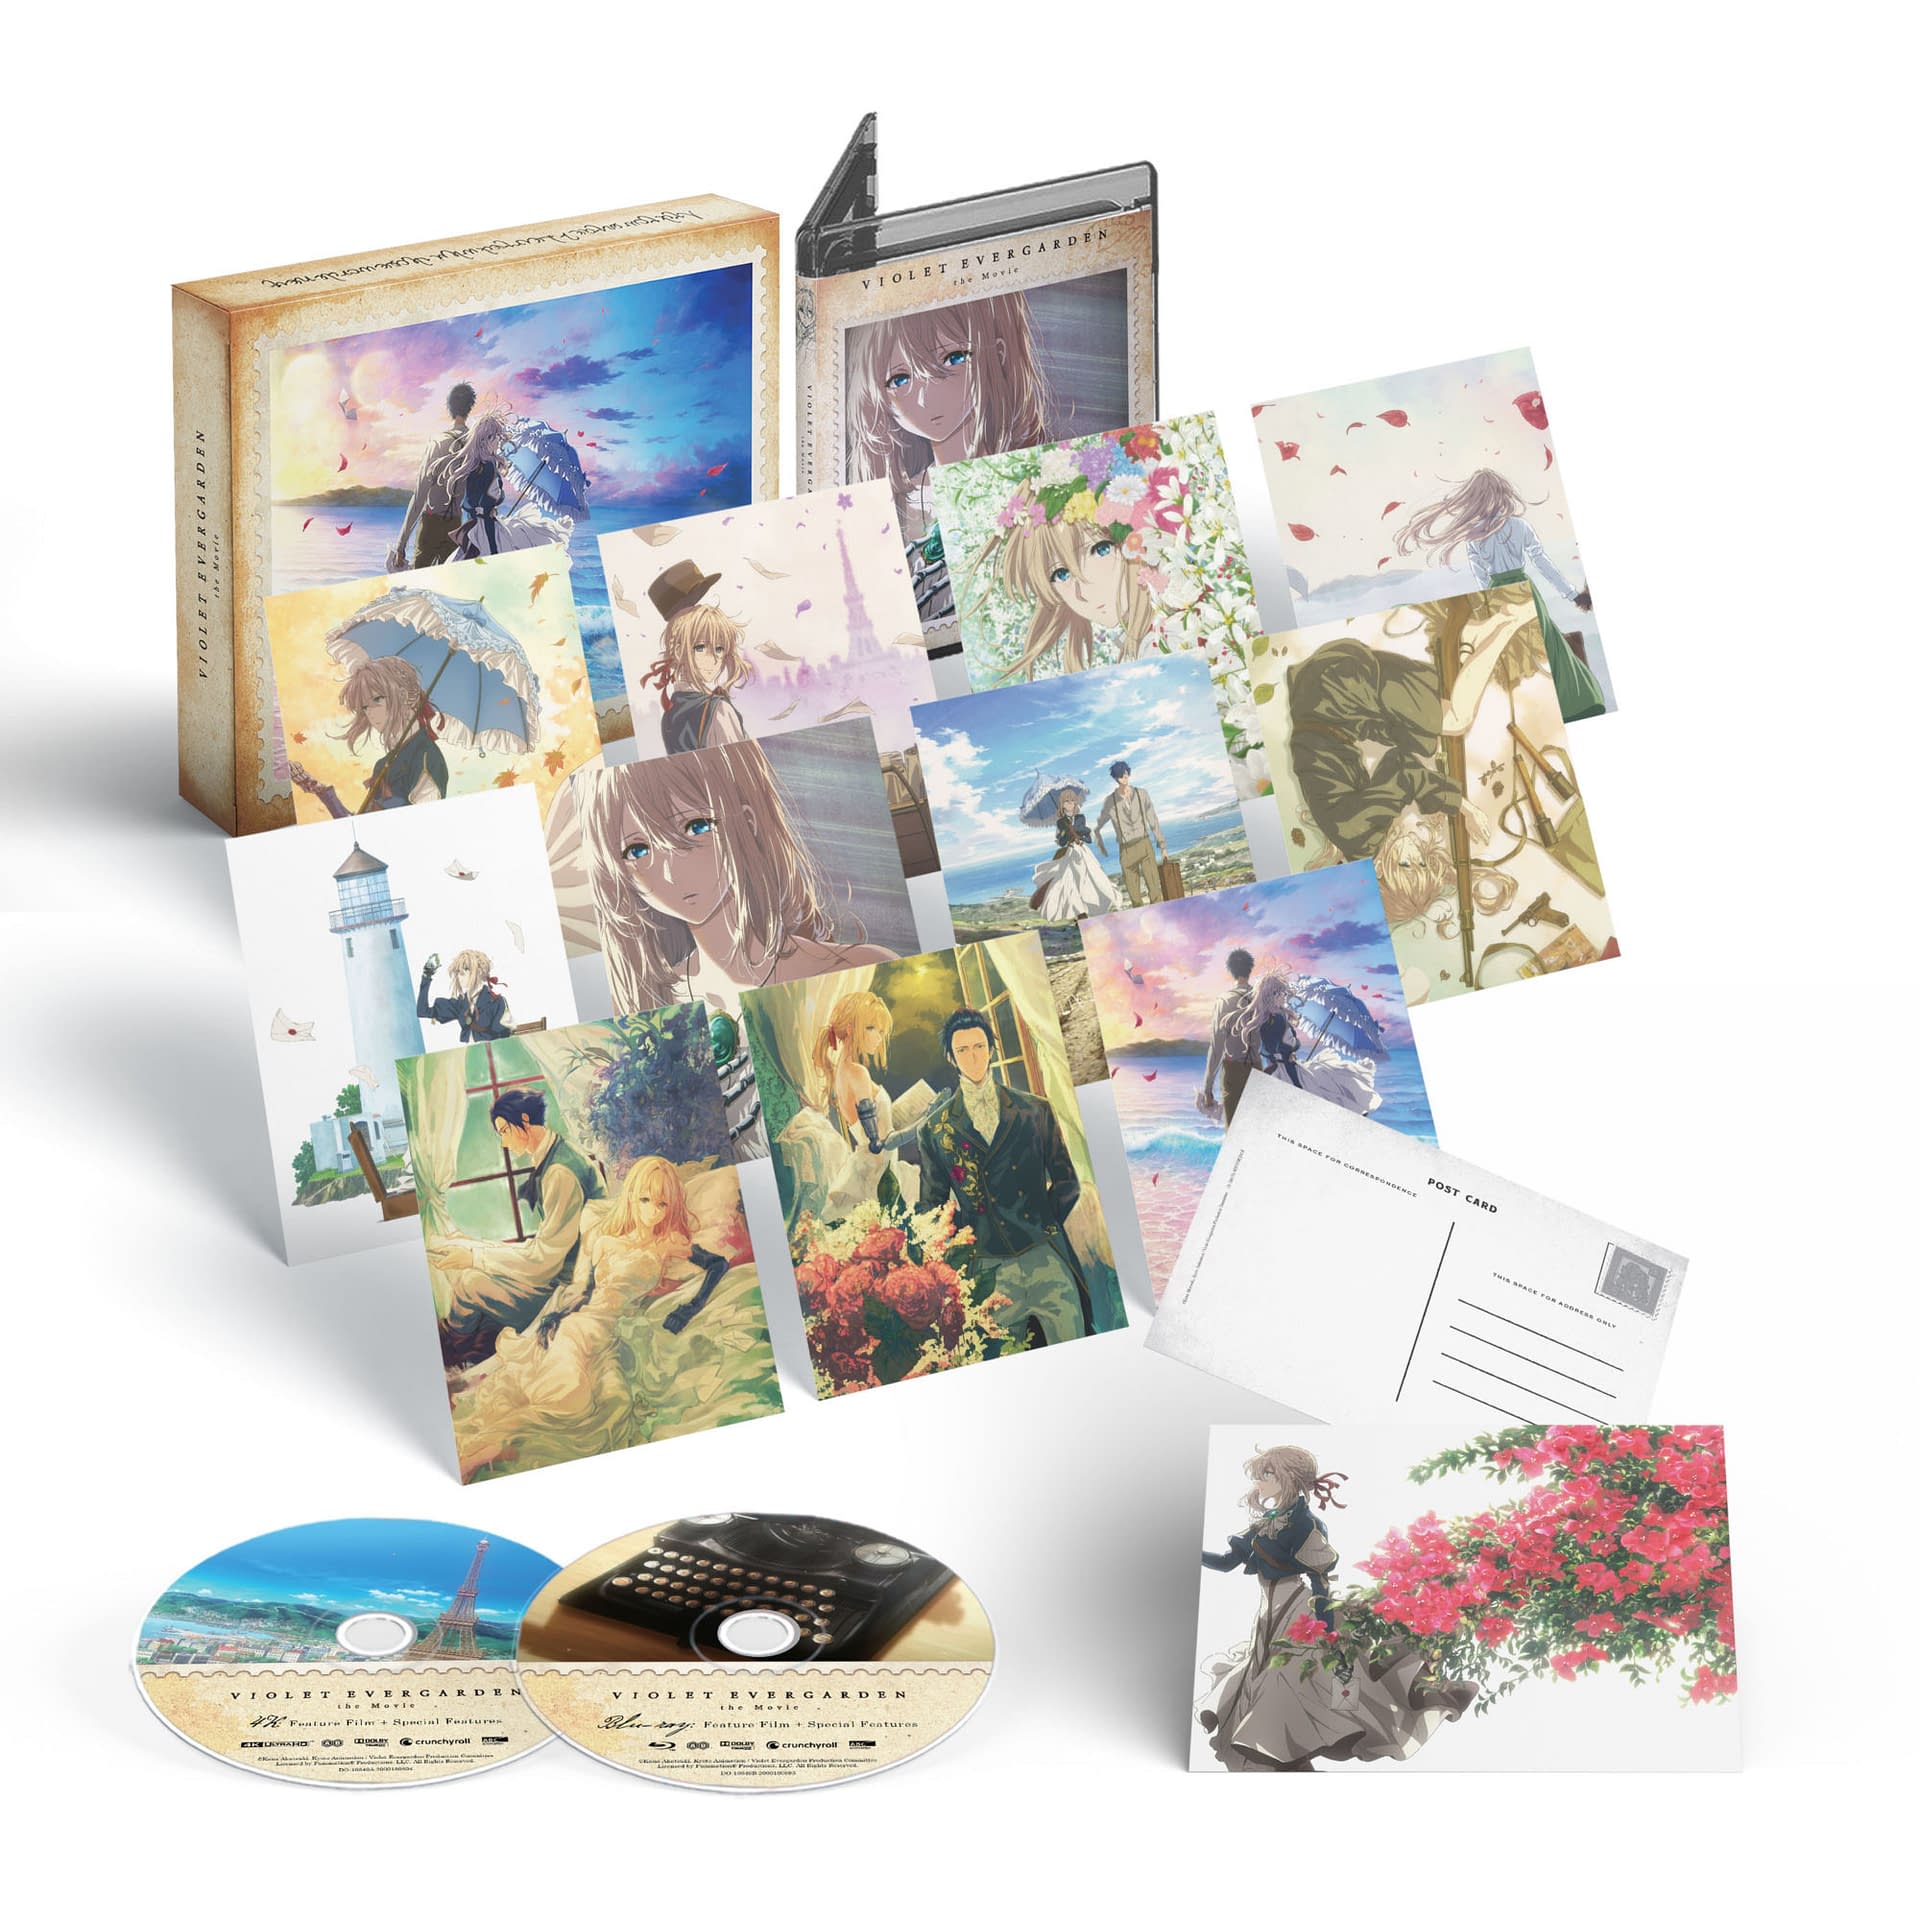 Violet Evergarden The Movie tops Crunchyroll Blu-Ray Releases in May